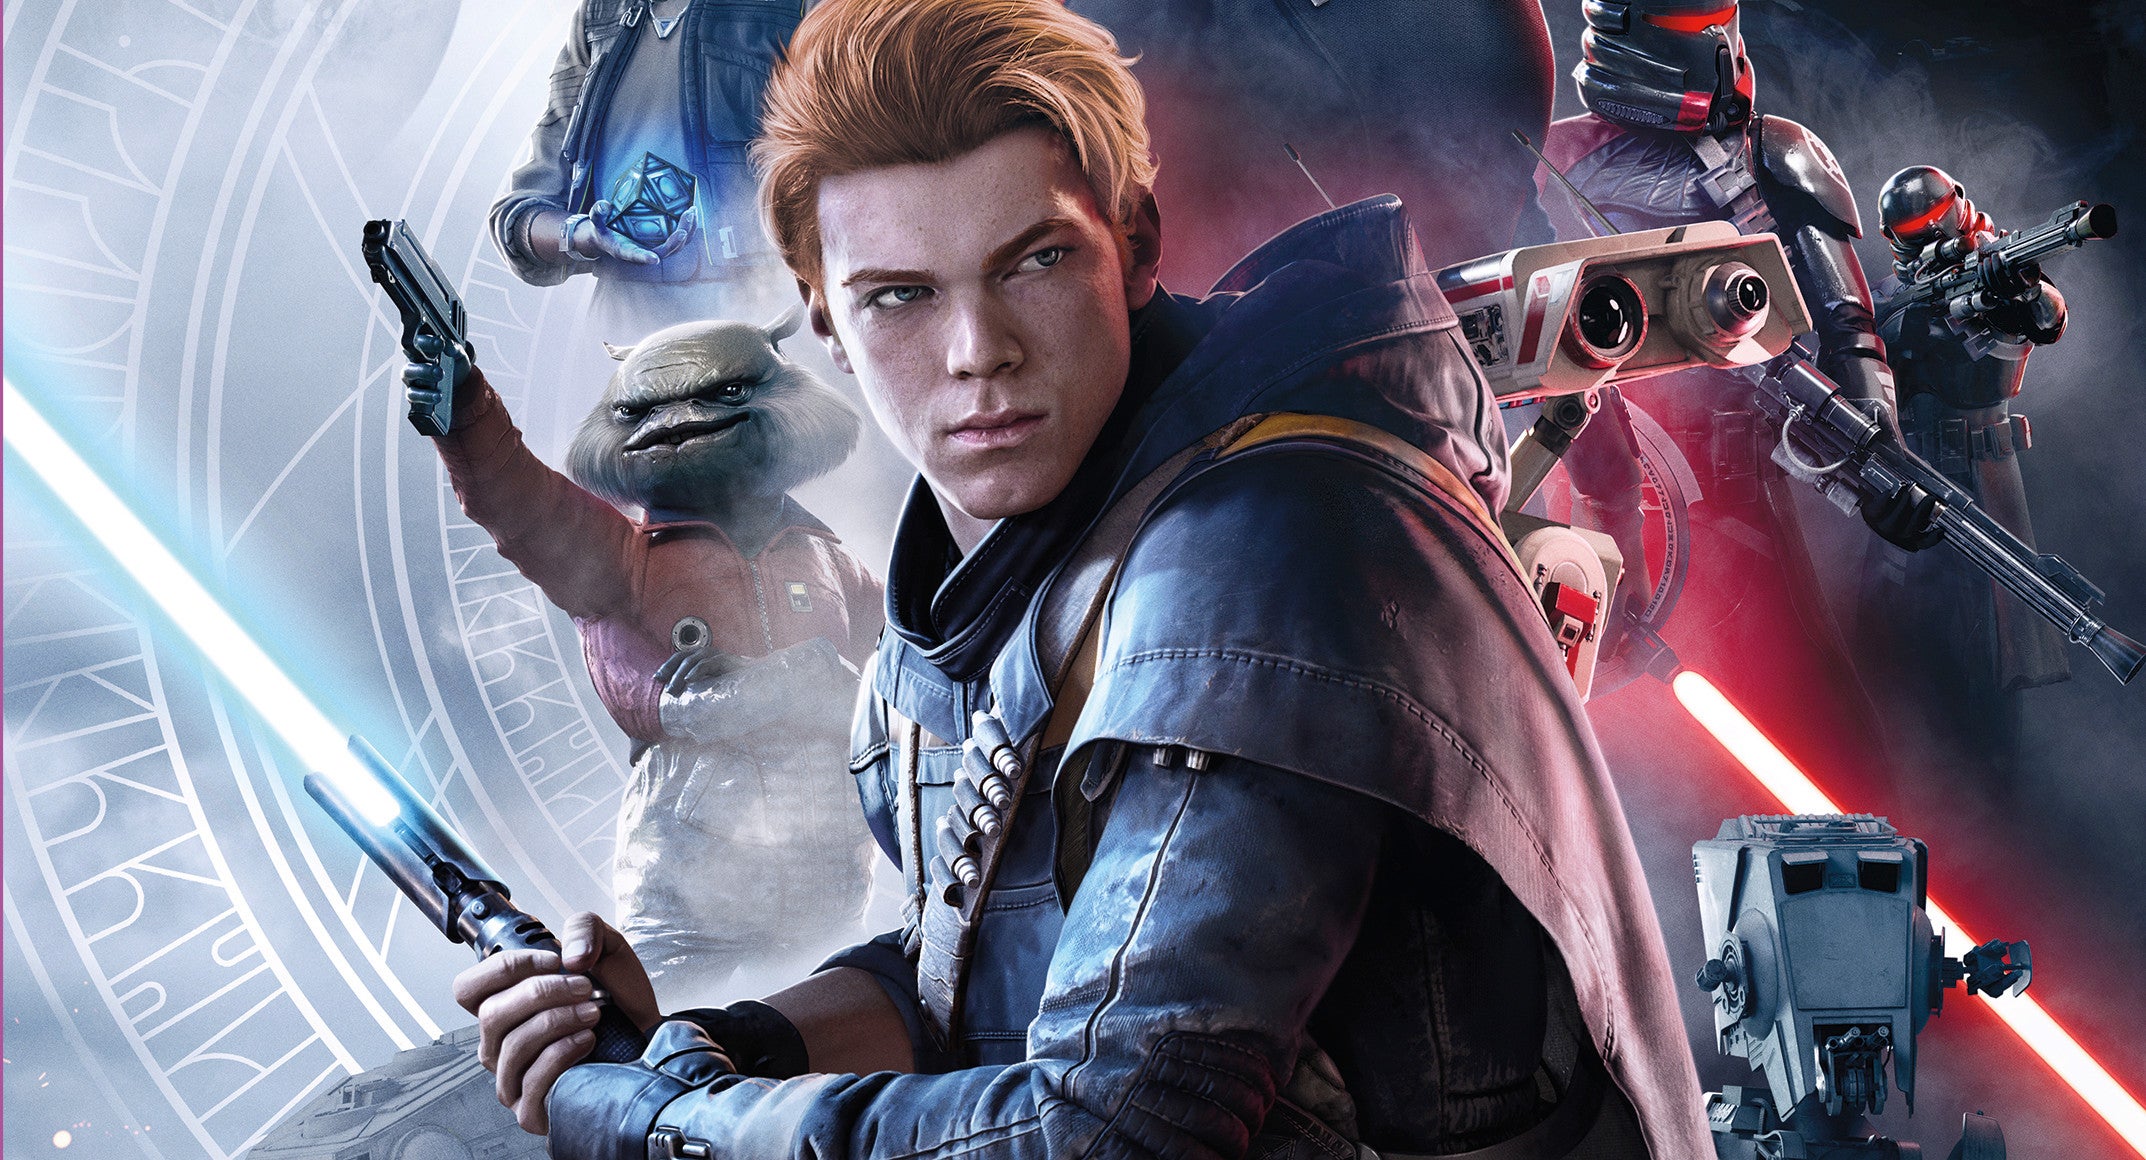 Image for Prime Gaming January 2022 games include Star Wars: Jedi Fallen Order, Total War: Warhammer, more